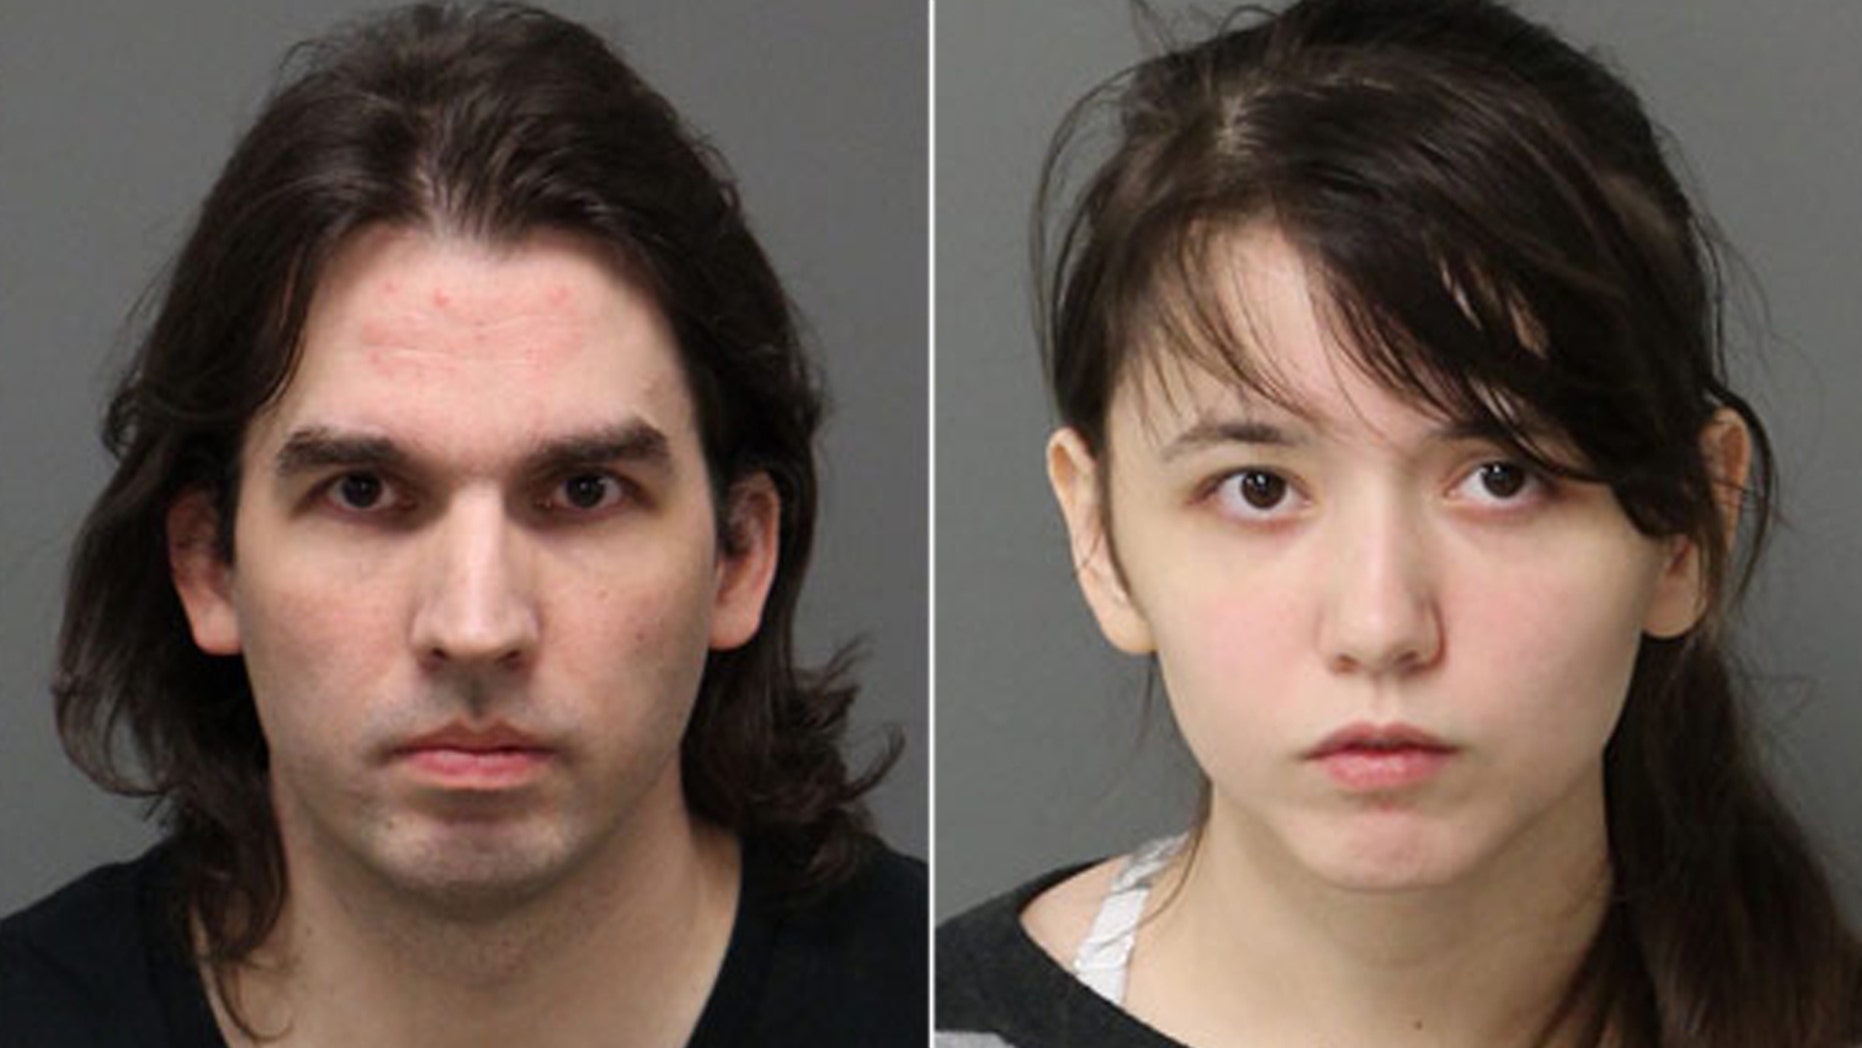 North Carolina Father Daughter Couple Arrested For Incest